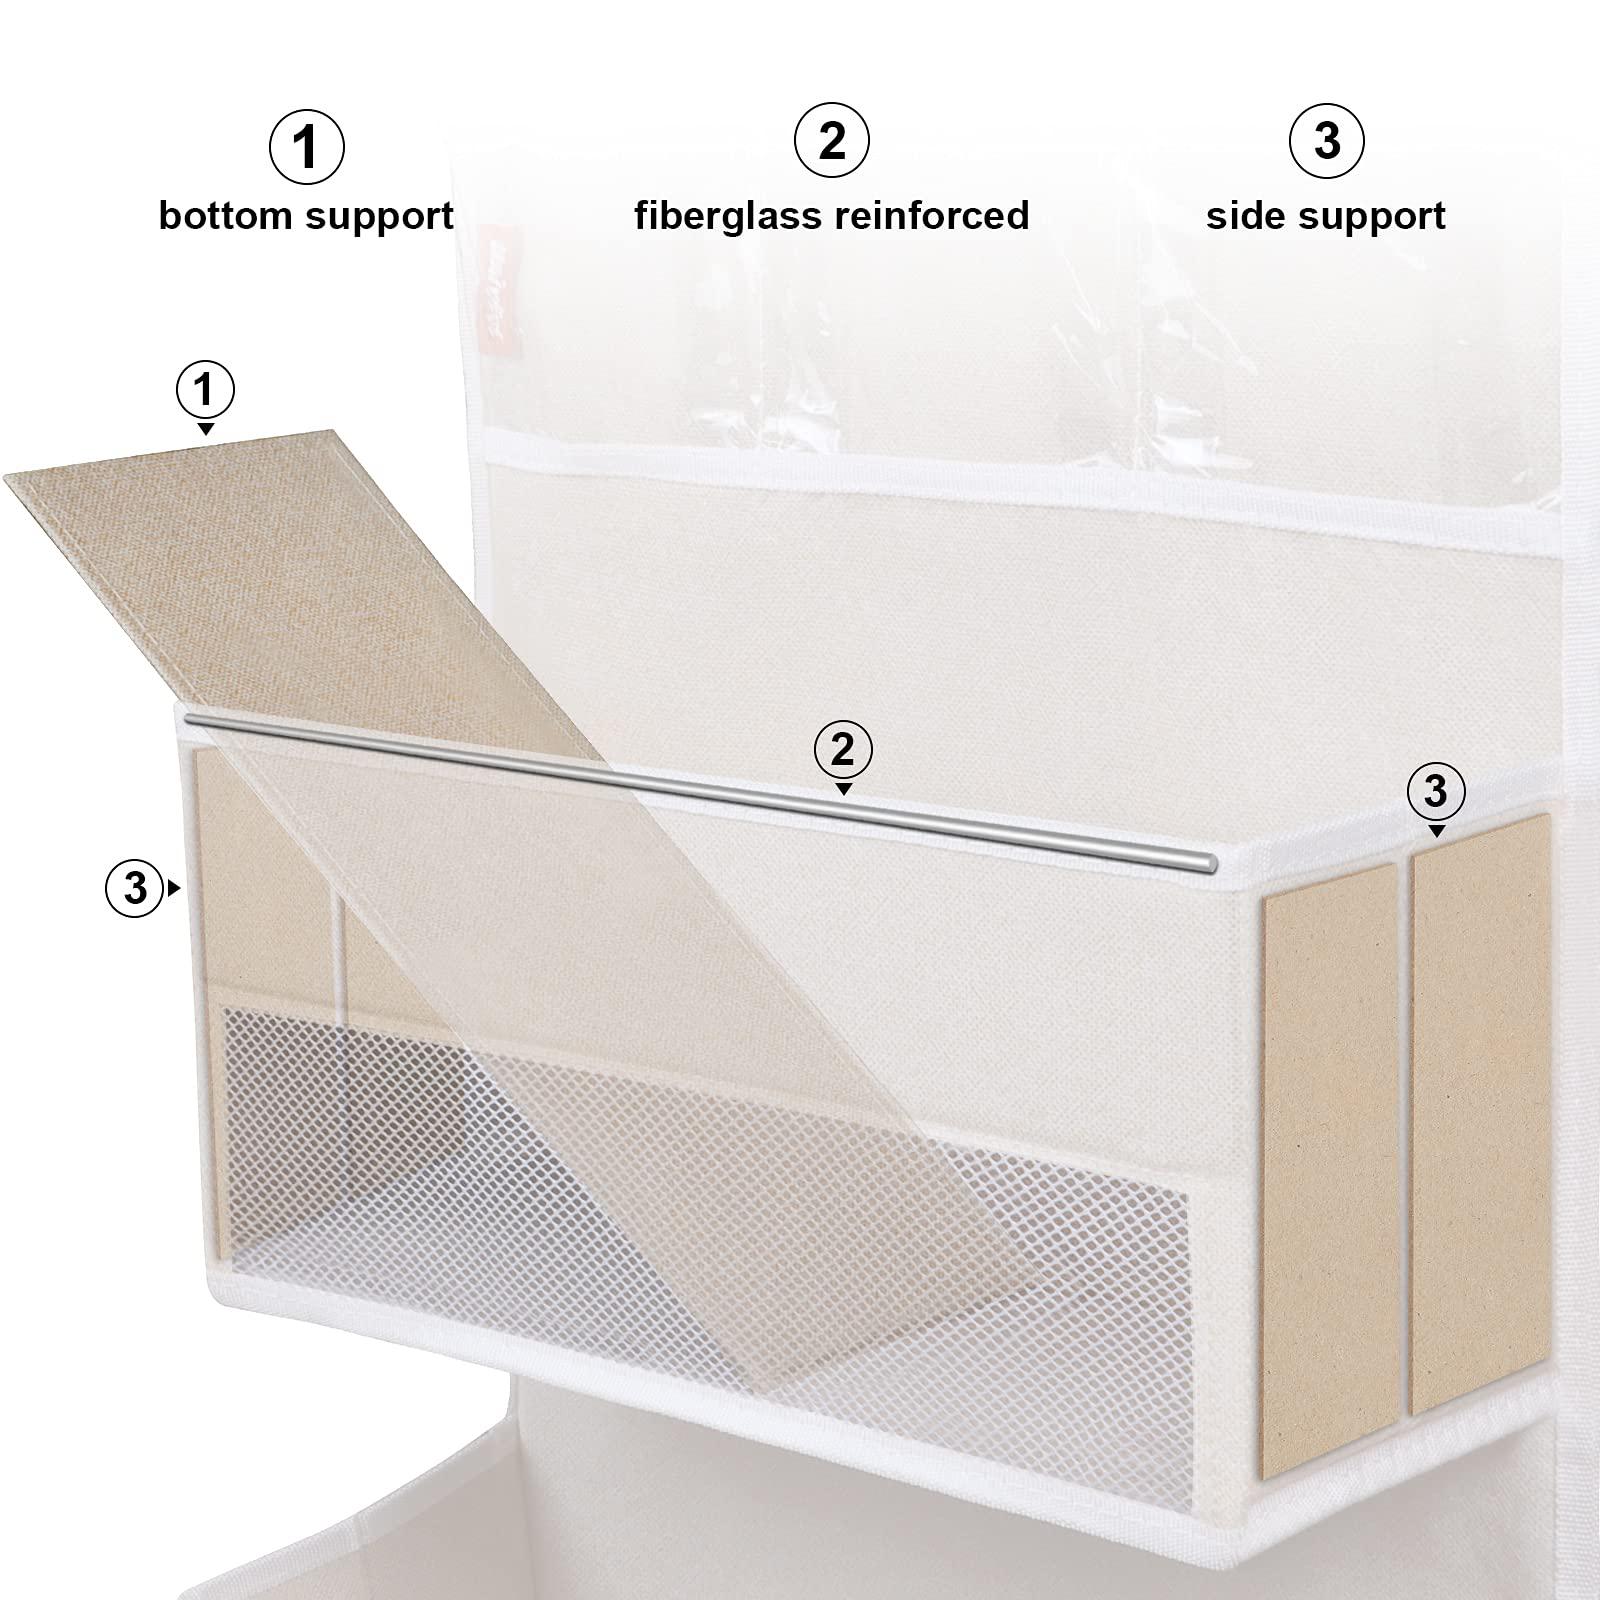 univivi 6-shelf over door hanging organizer fabric door storage with 5 large pockets and 3 small pvc pockets wall mount hangi